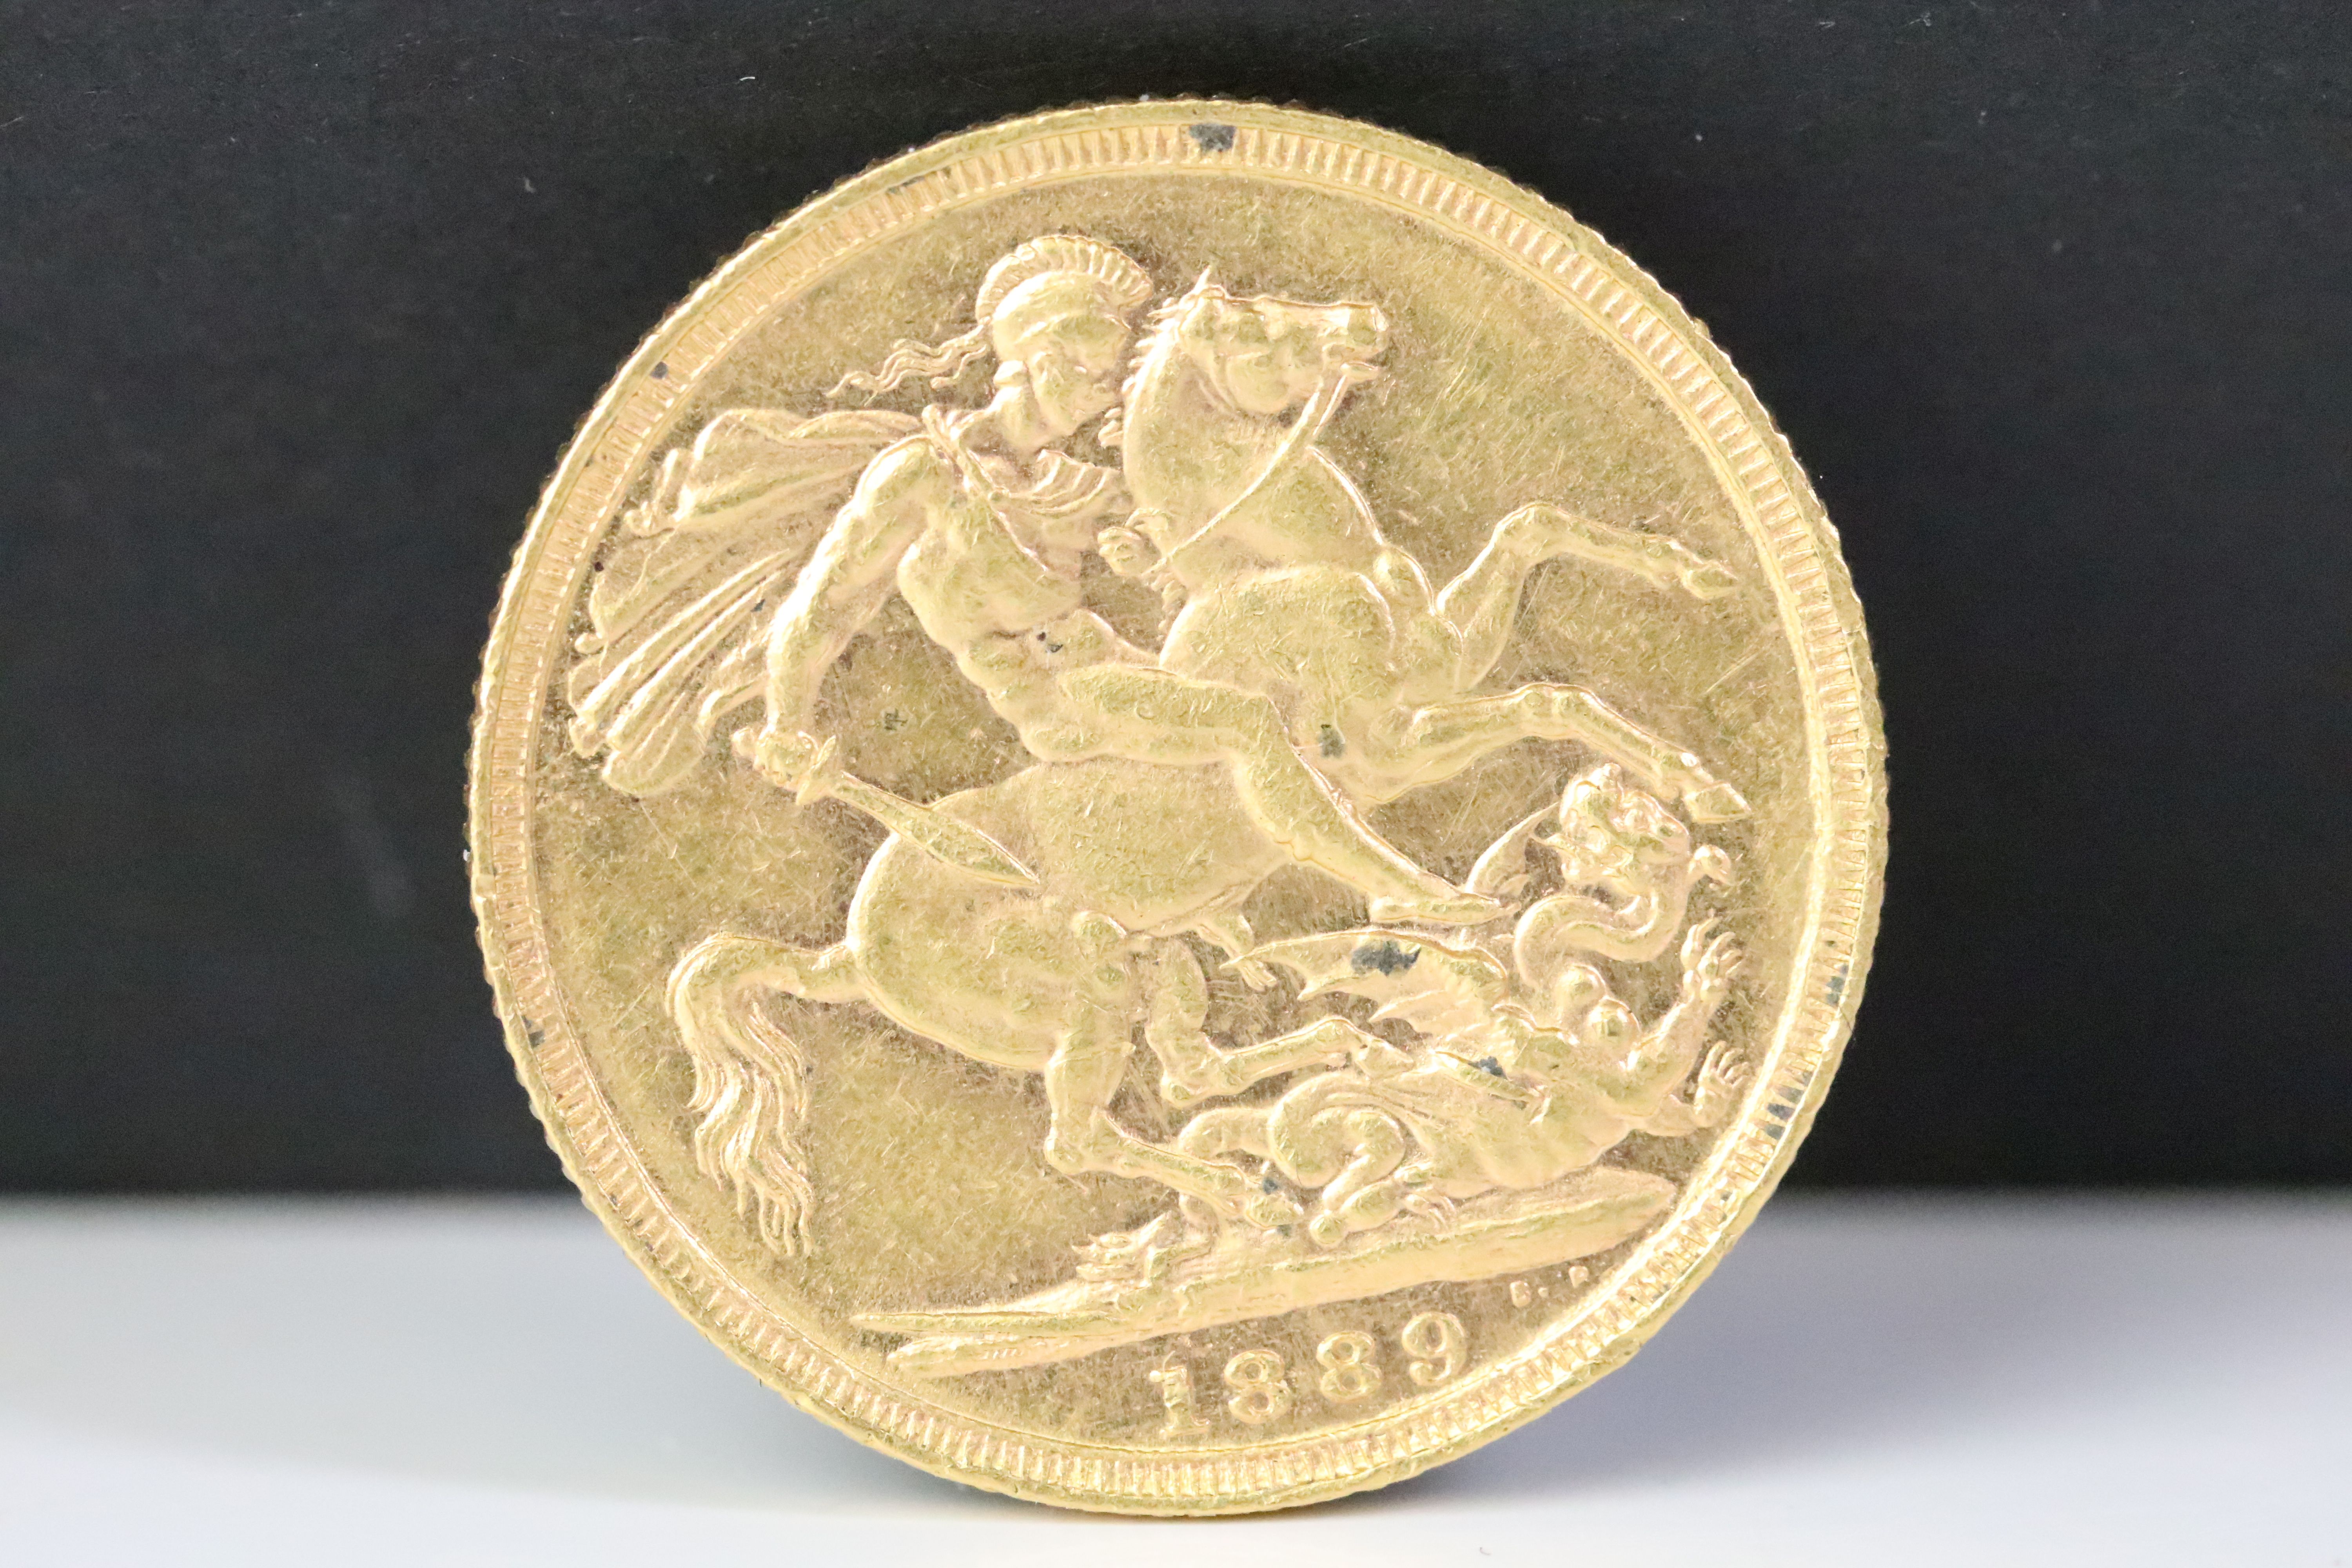 A British Queen Victoria 1889 (Jubilee Head) gold full sovereign coin.